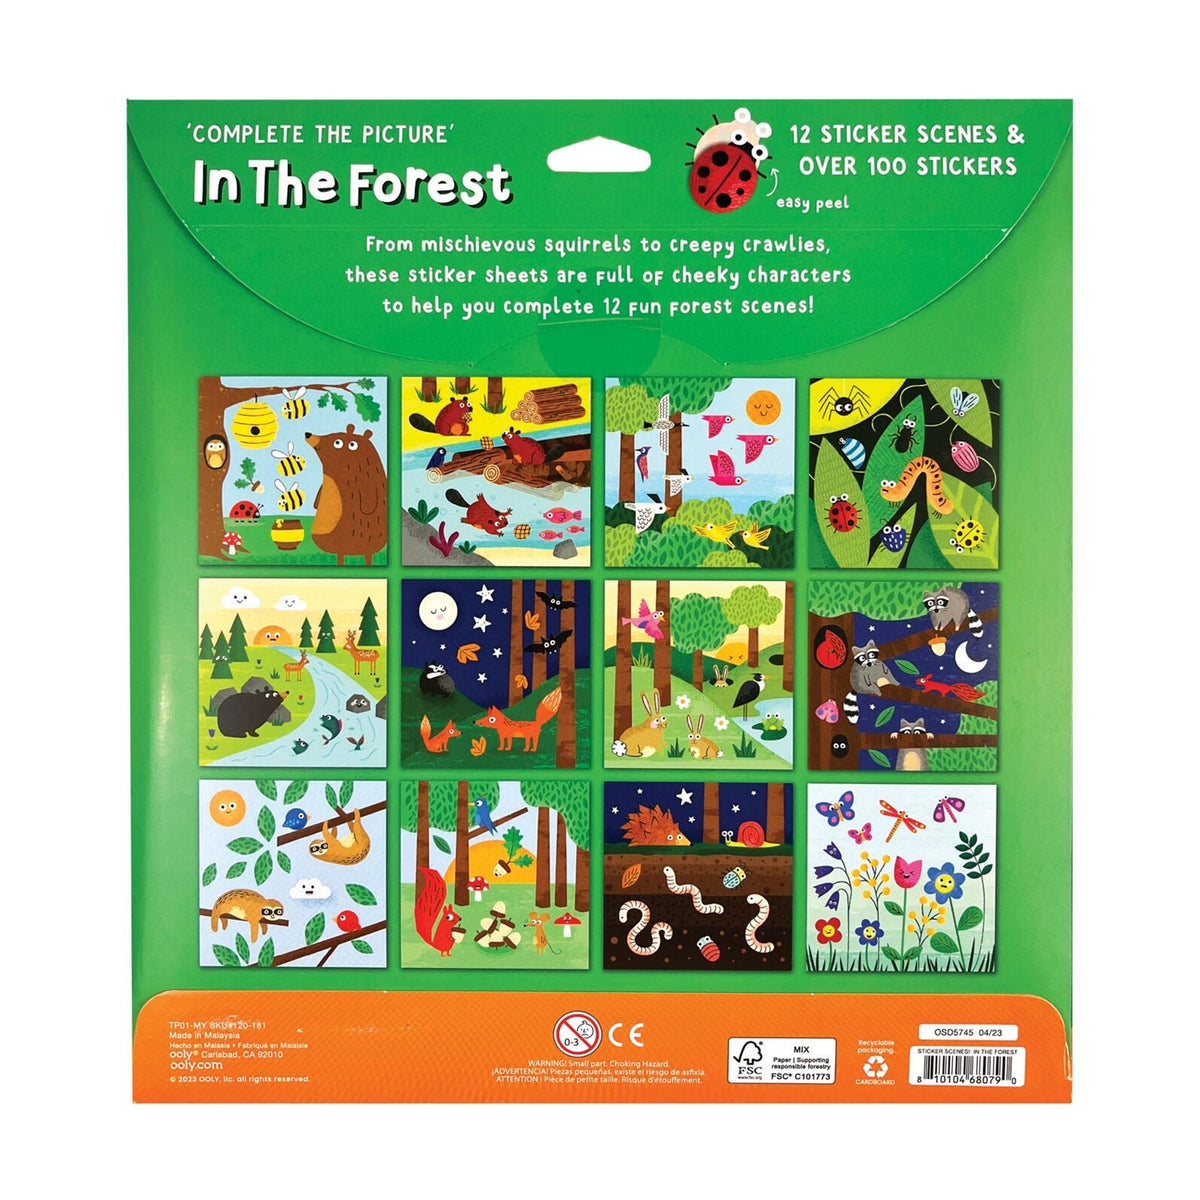 Sticker Scenes! - in the Forest